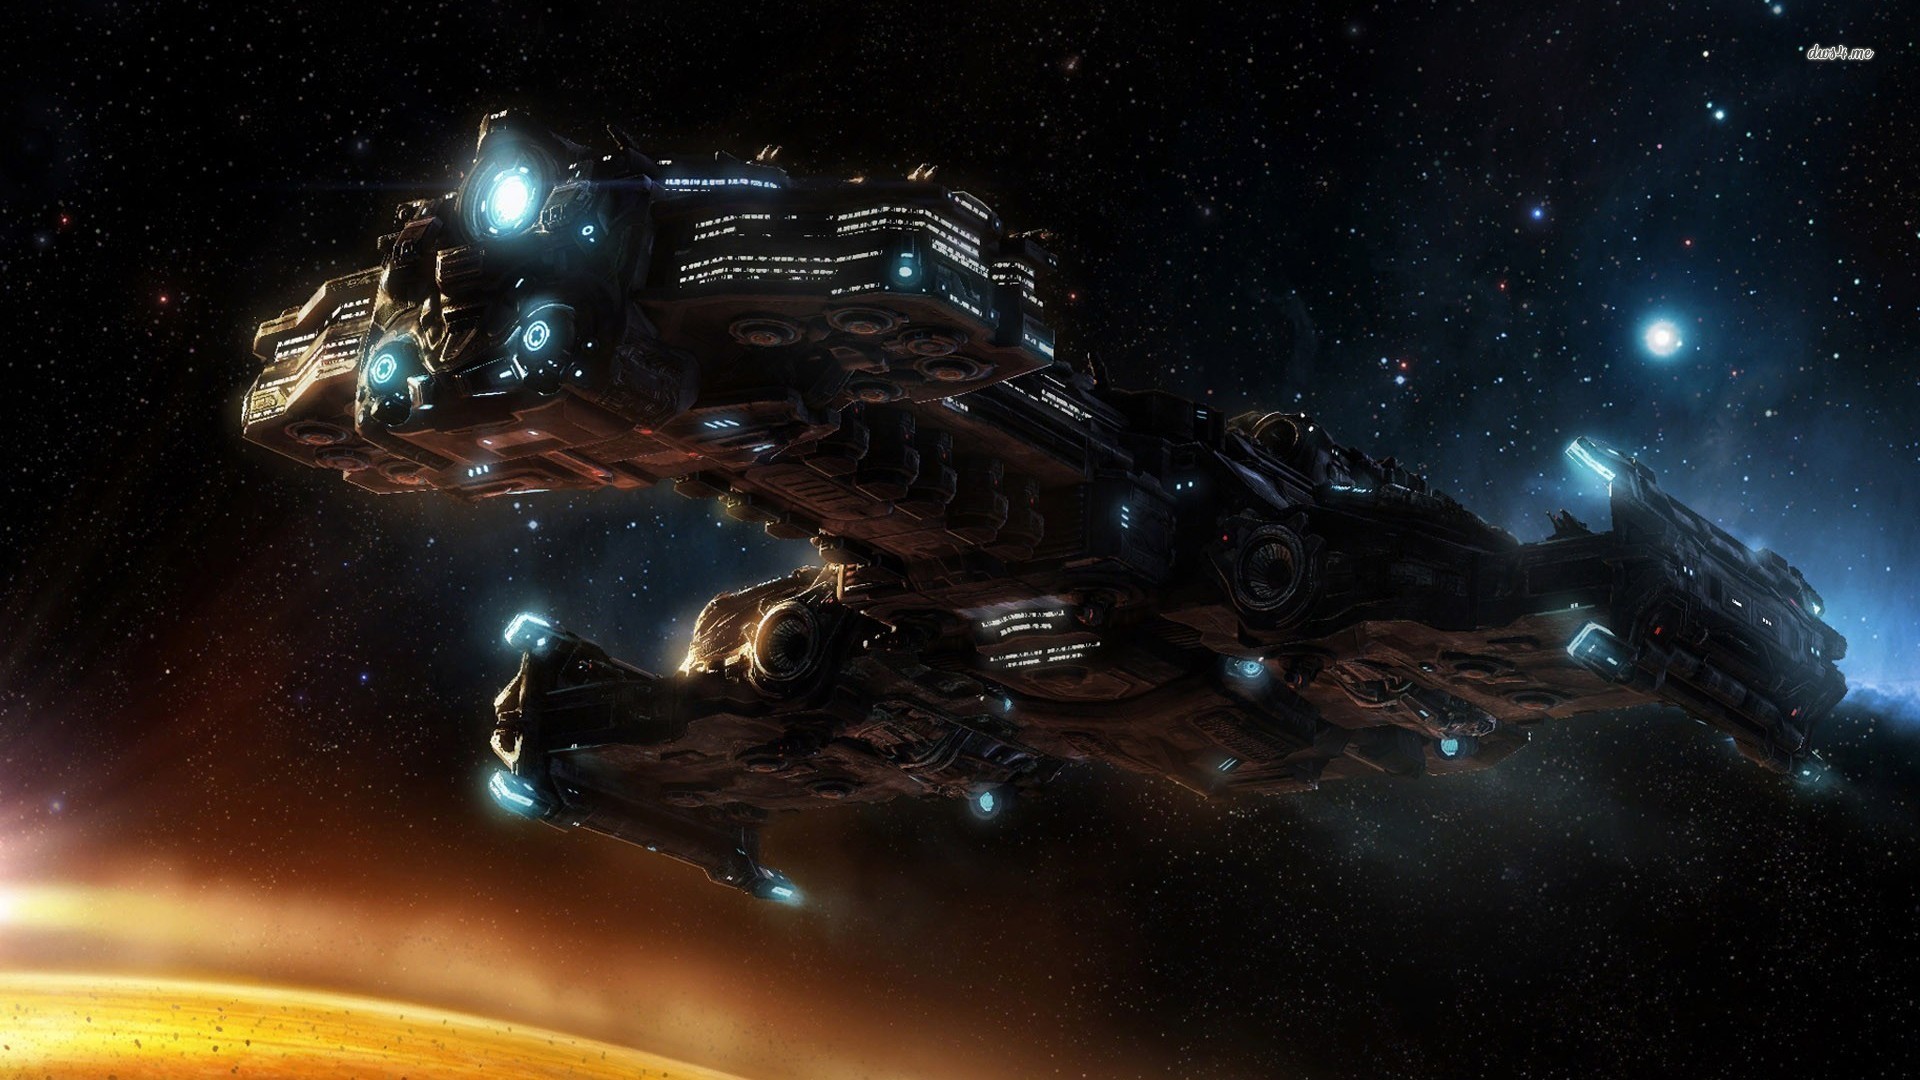 starcraft 2 wallpaper 1920x1080,outer space,cg artwork,space,universe,astronomical object